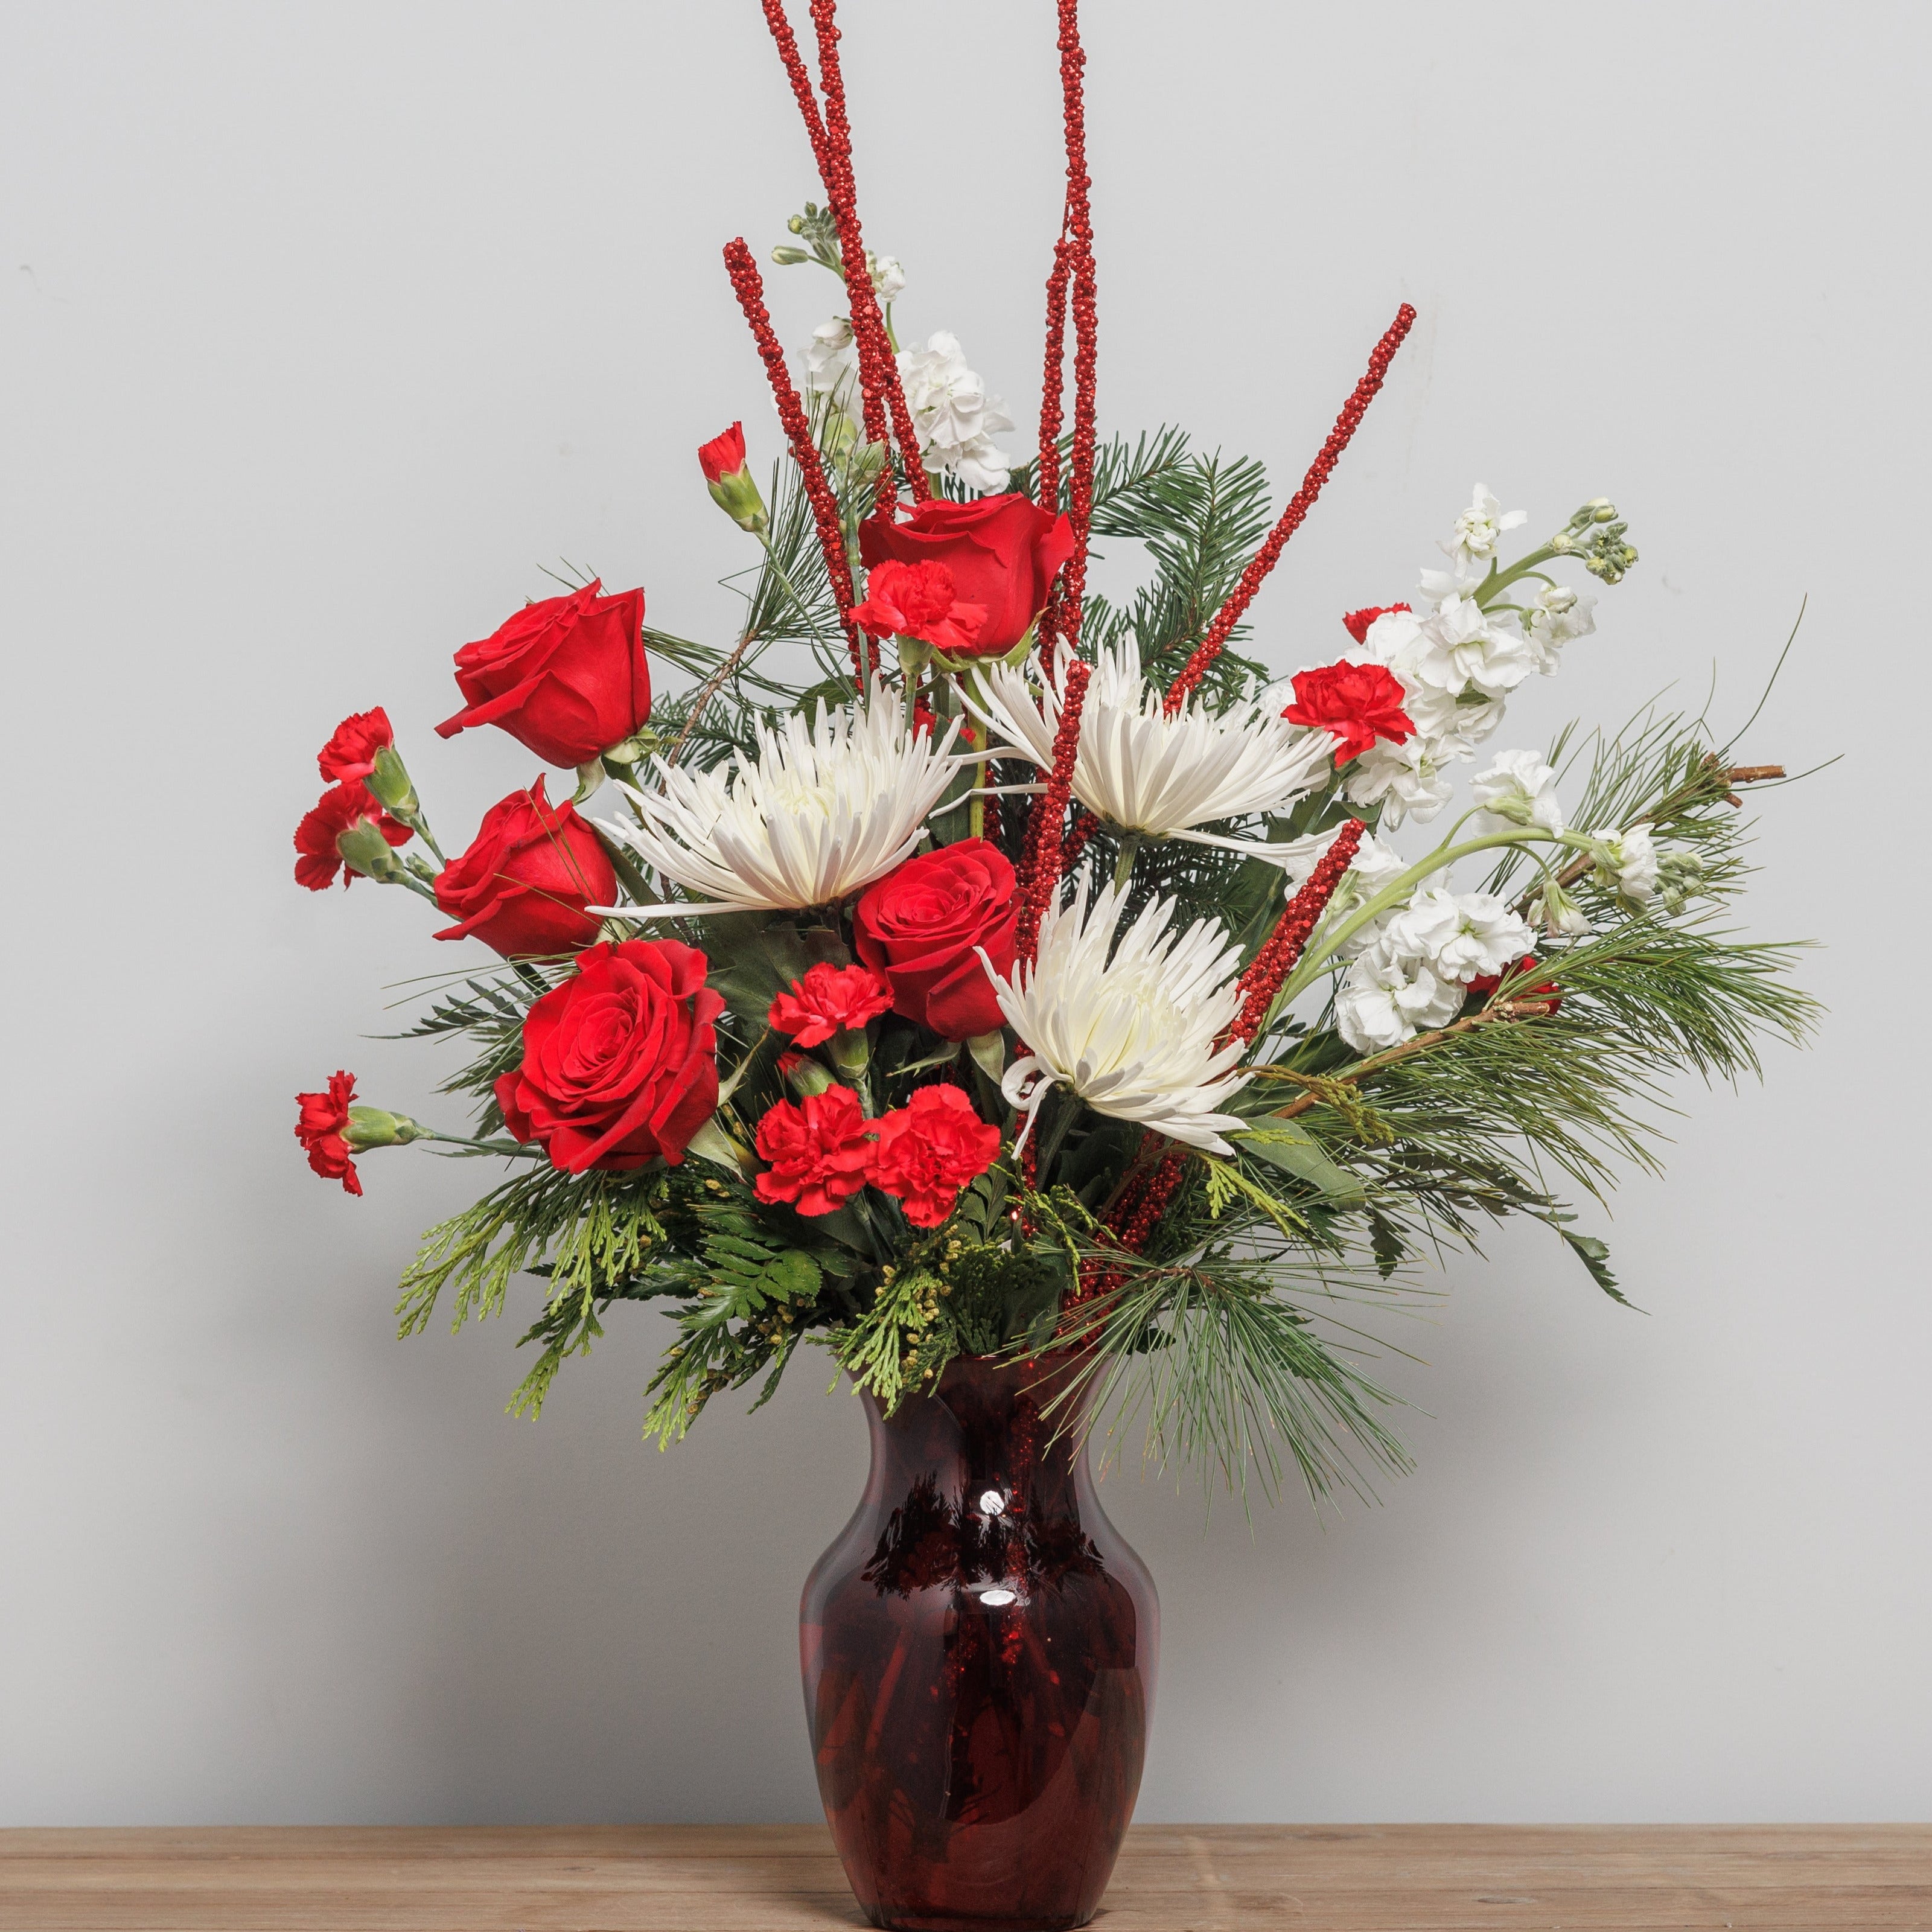 A white and red arrangement with glitter stems in a red vase.